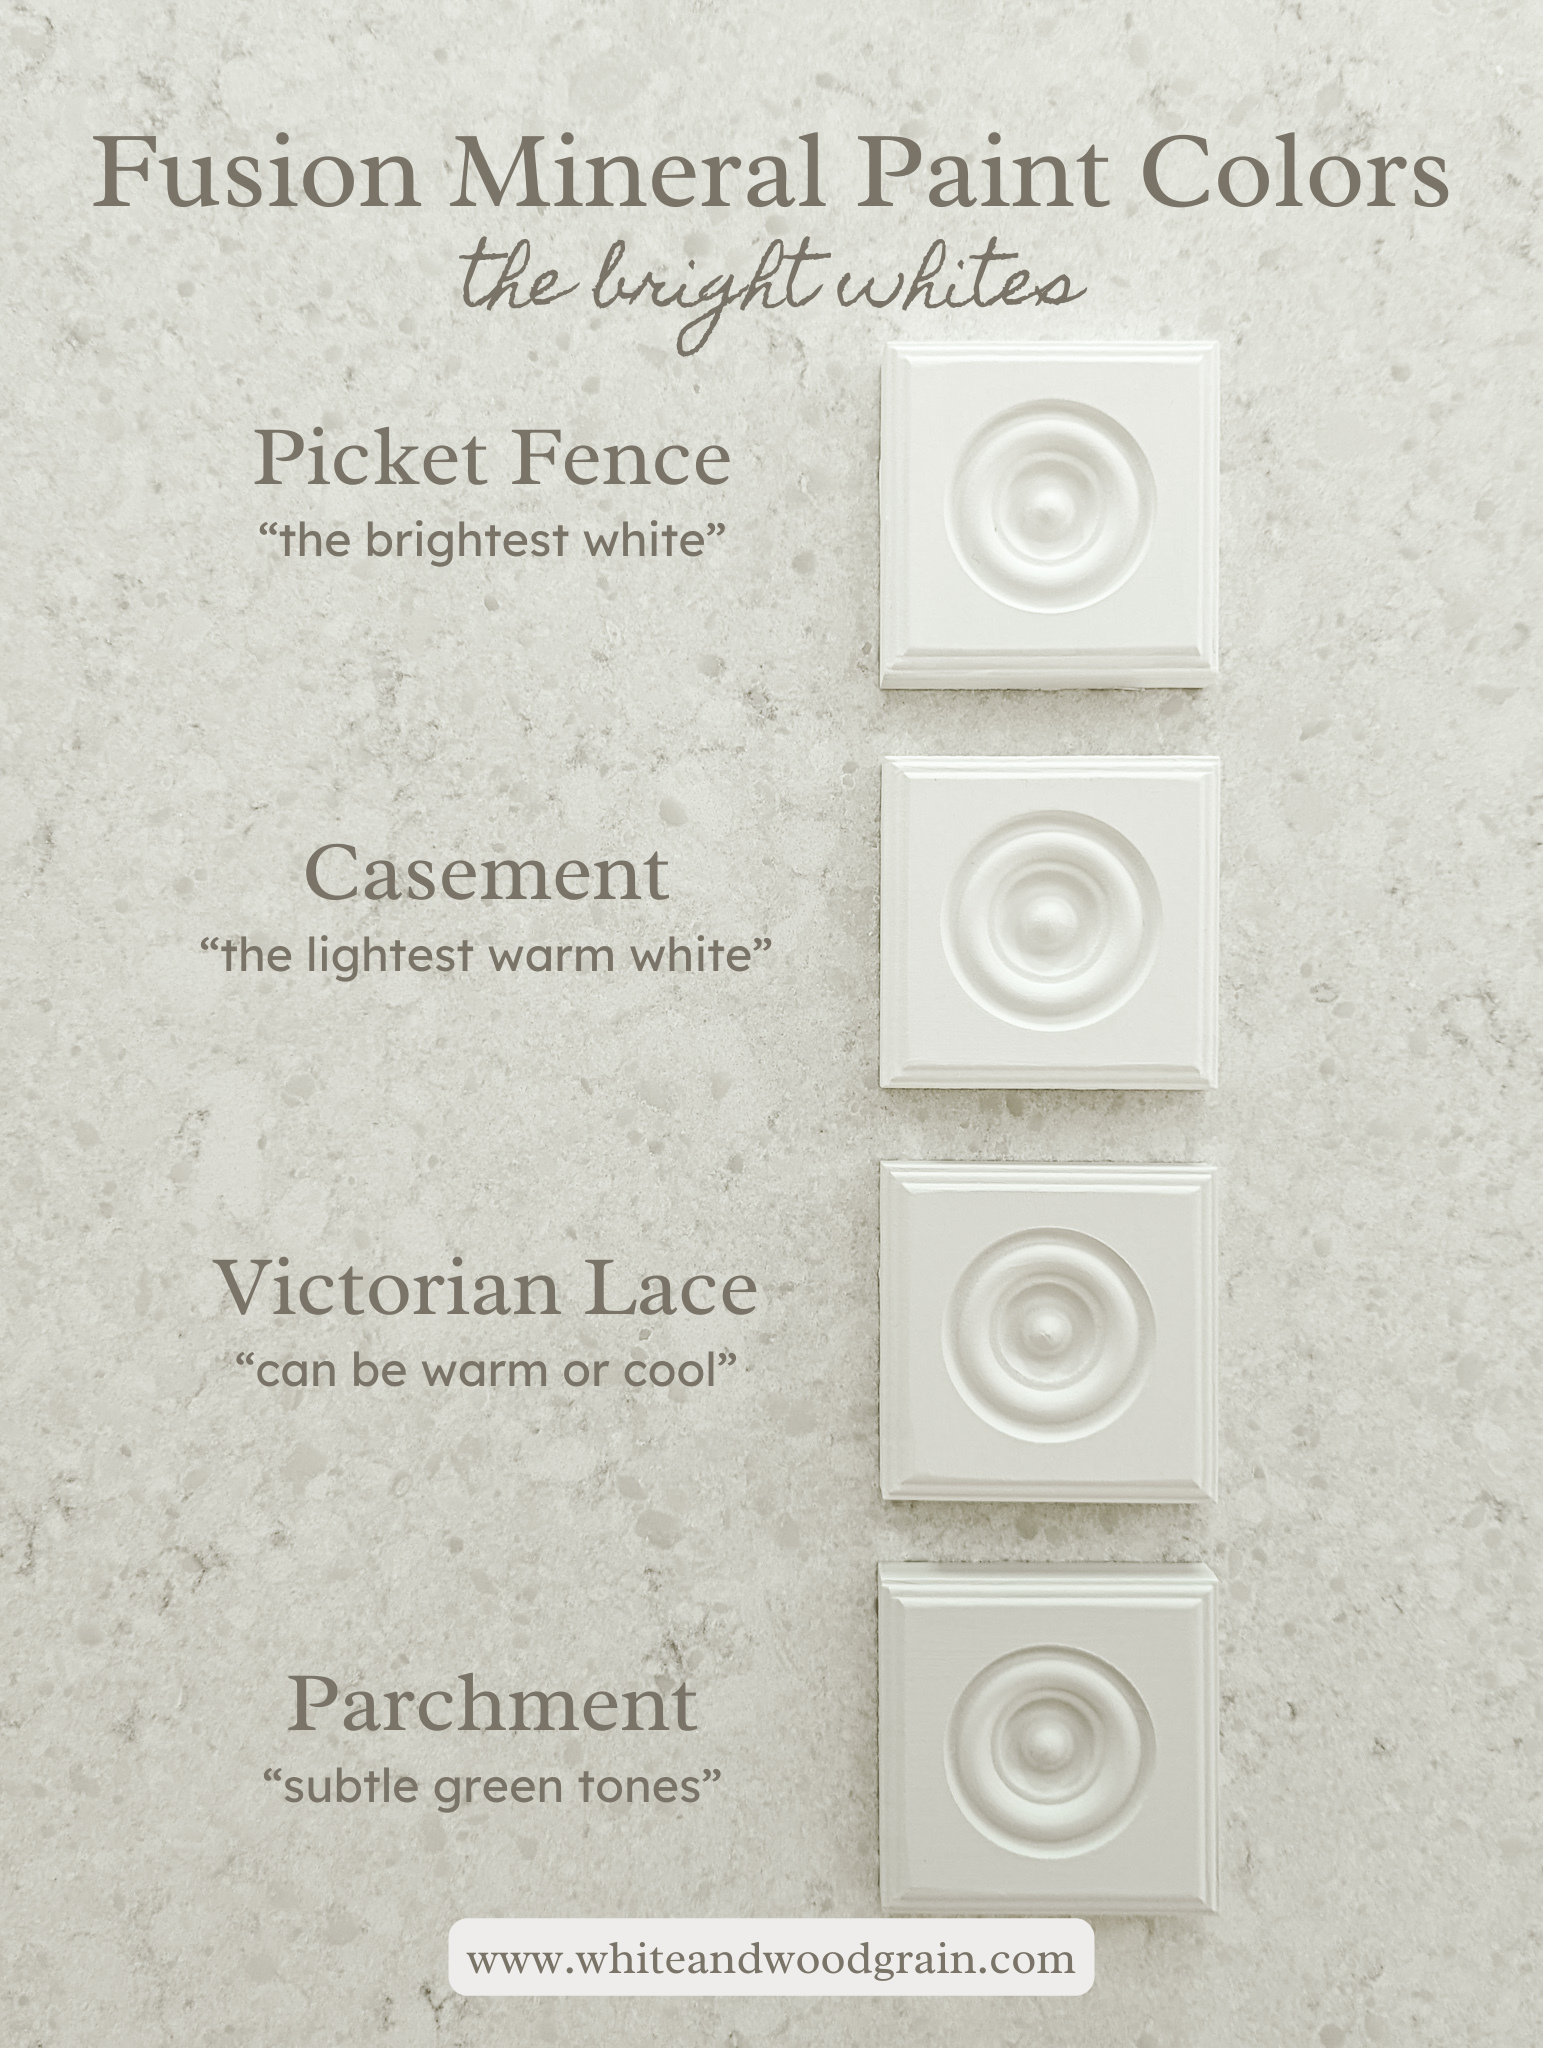 sampling all the white Fusion Mineral paint colors: picket fence, casement, victorian lace, and parchment